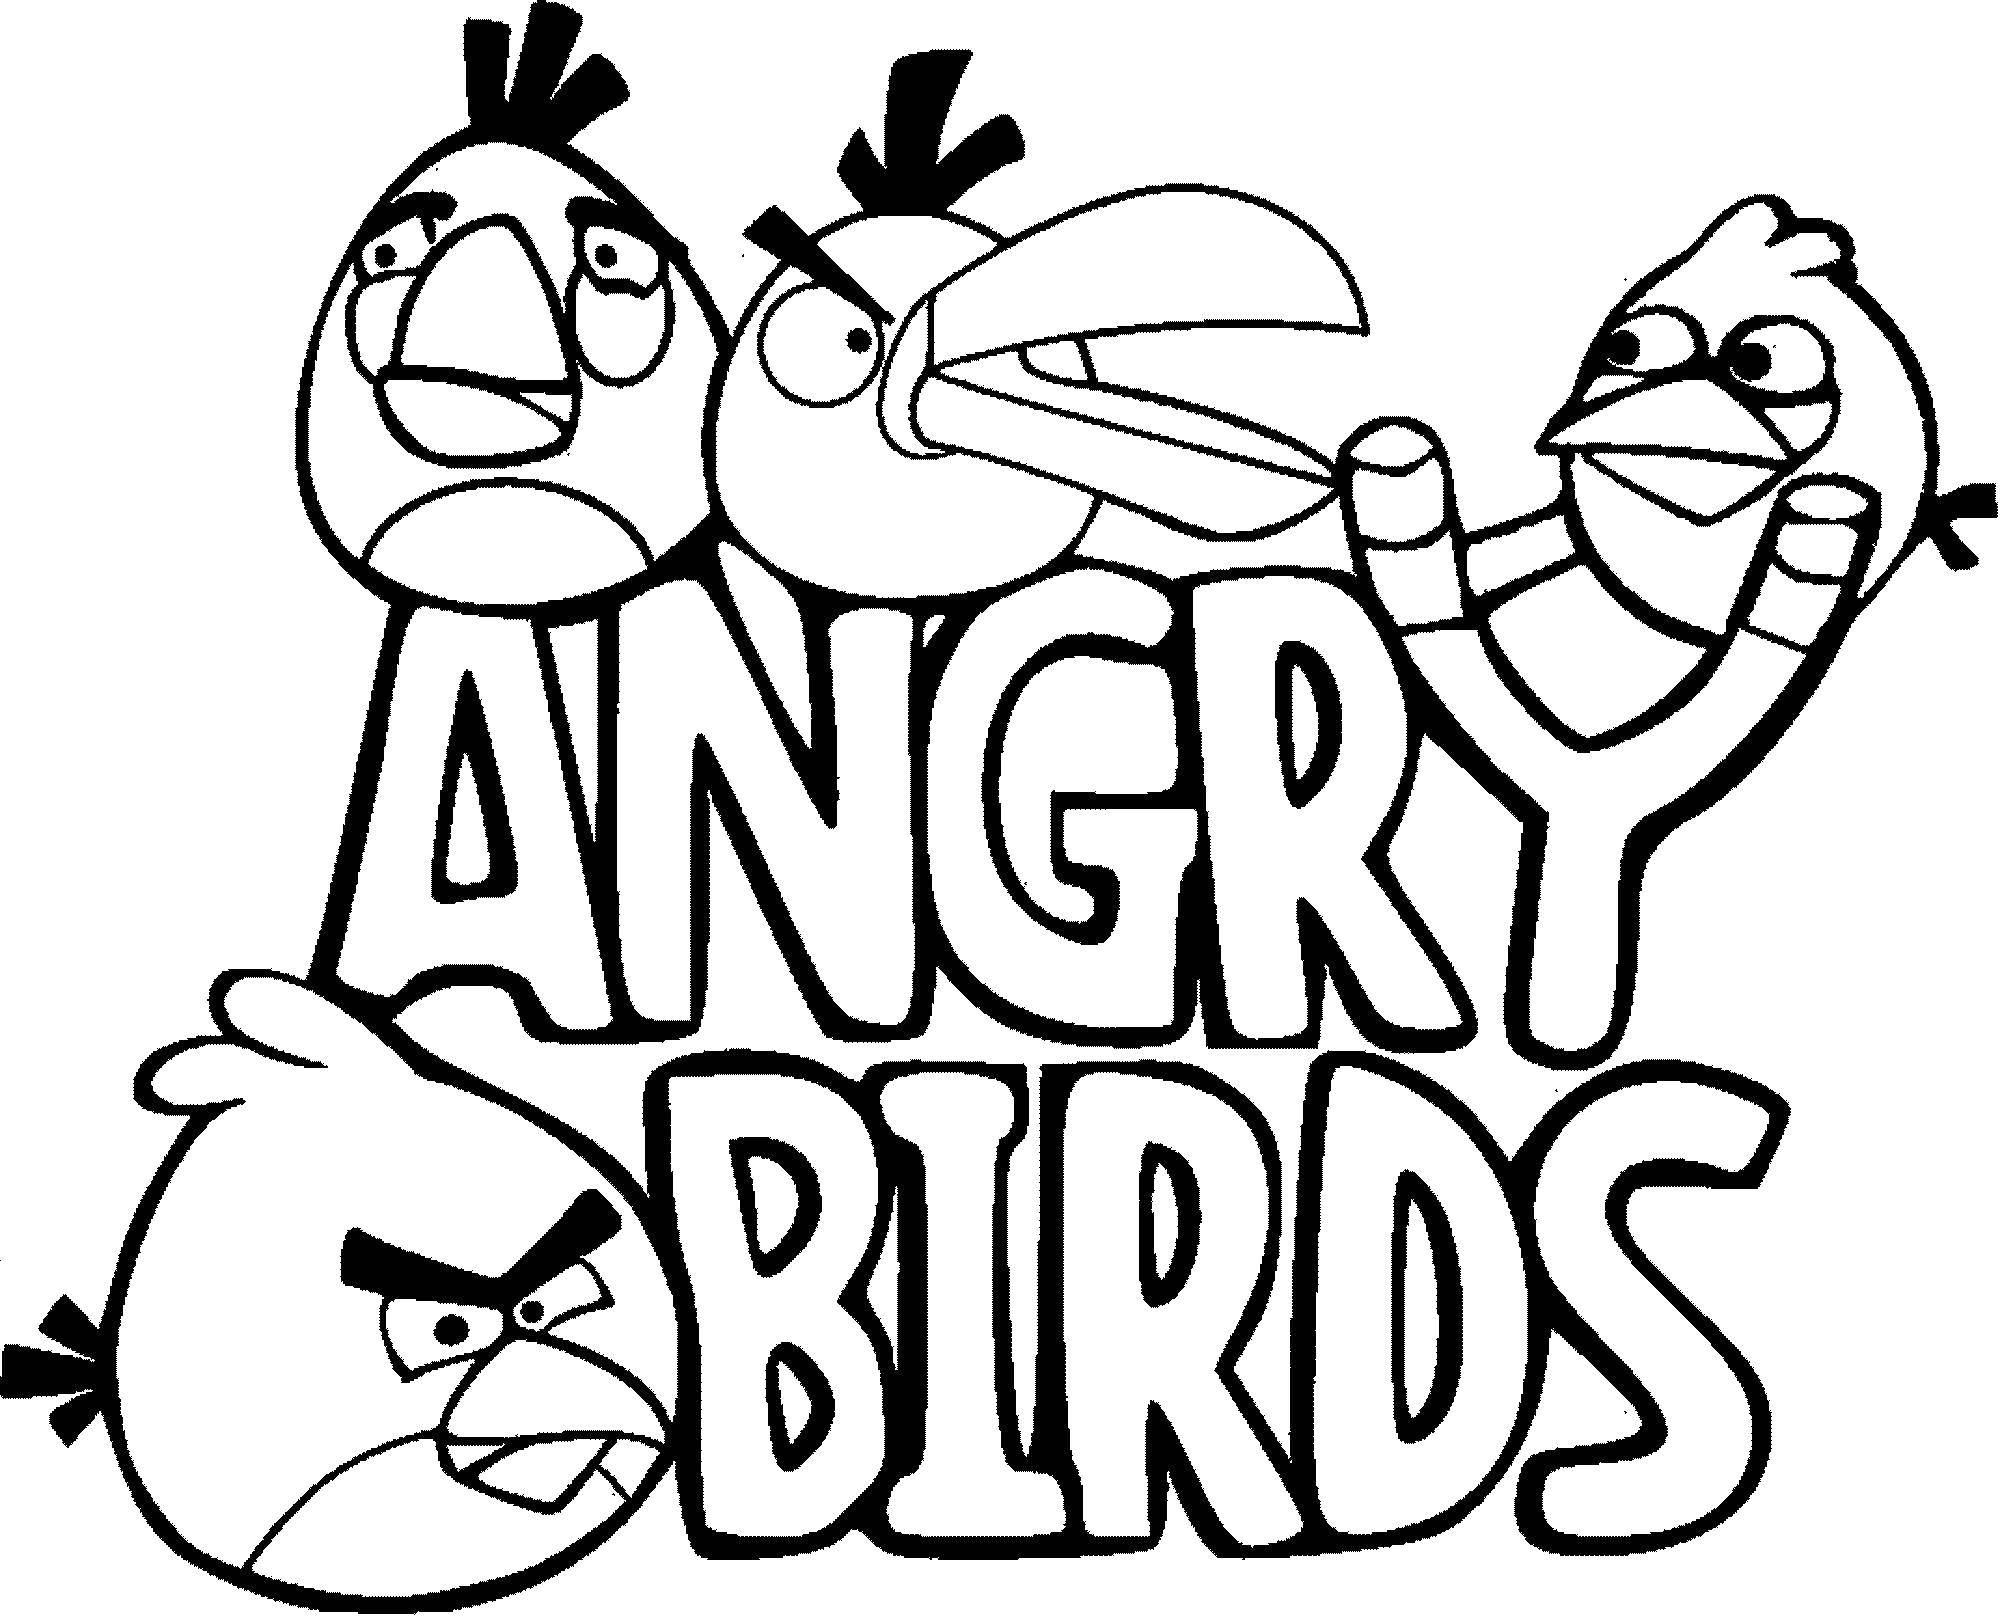 Coloring Birds from angry birds. Category angry birds. Tags:  angry birds, birds, slingshot.